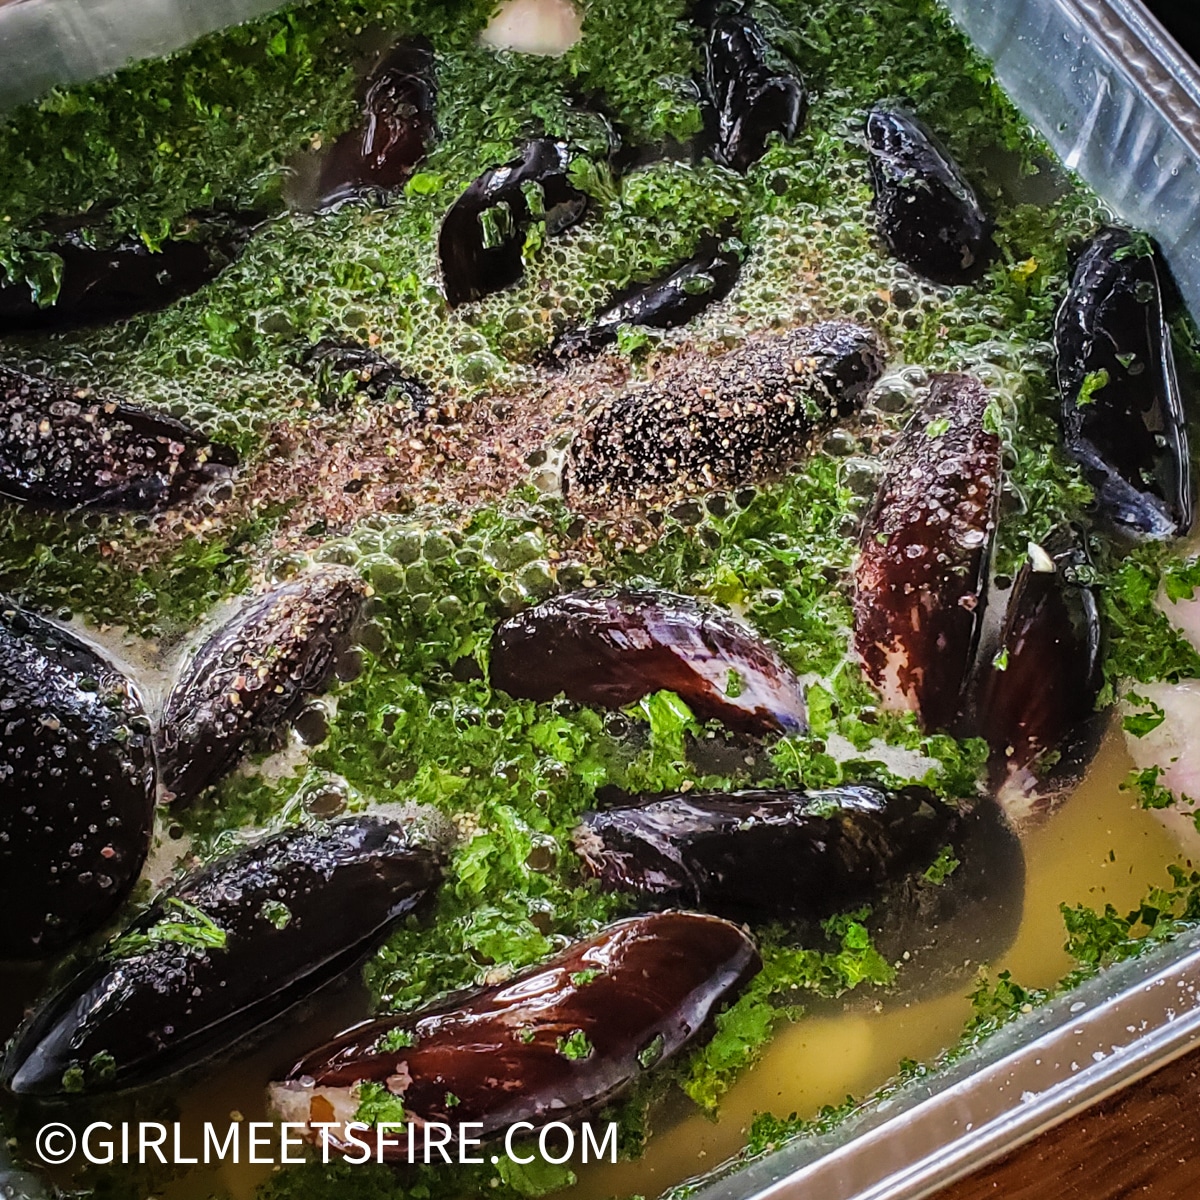 pan of mussels in marinade before cooking